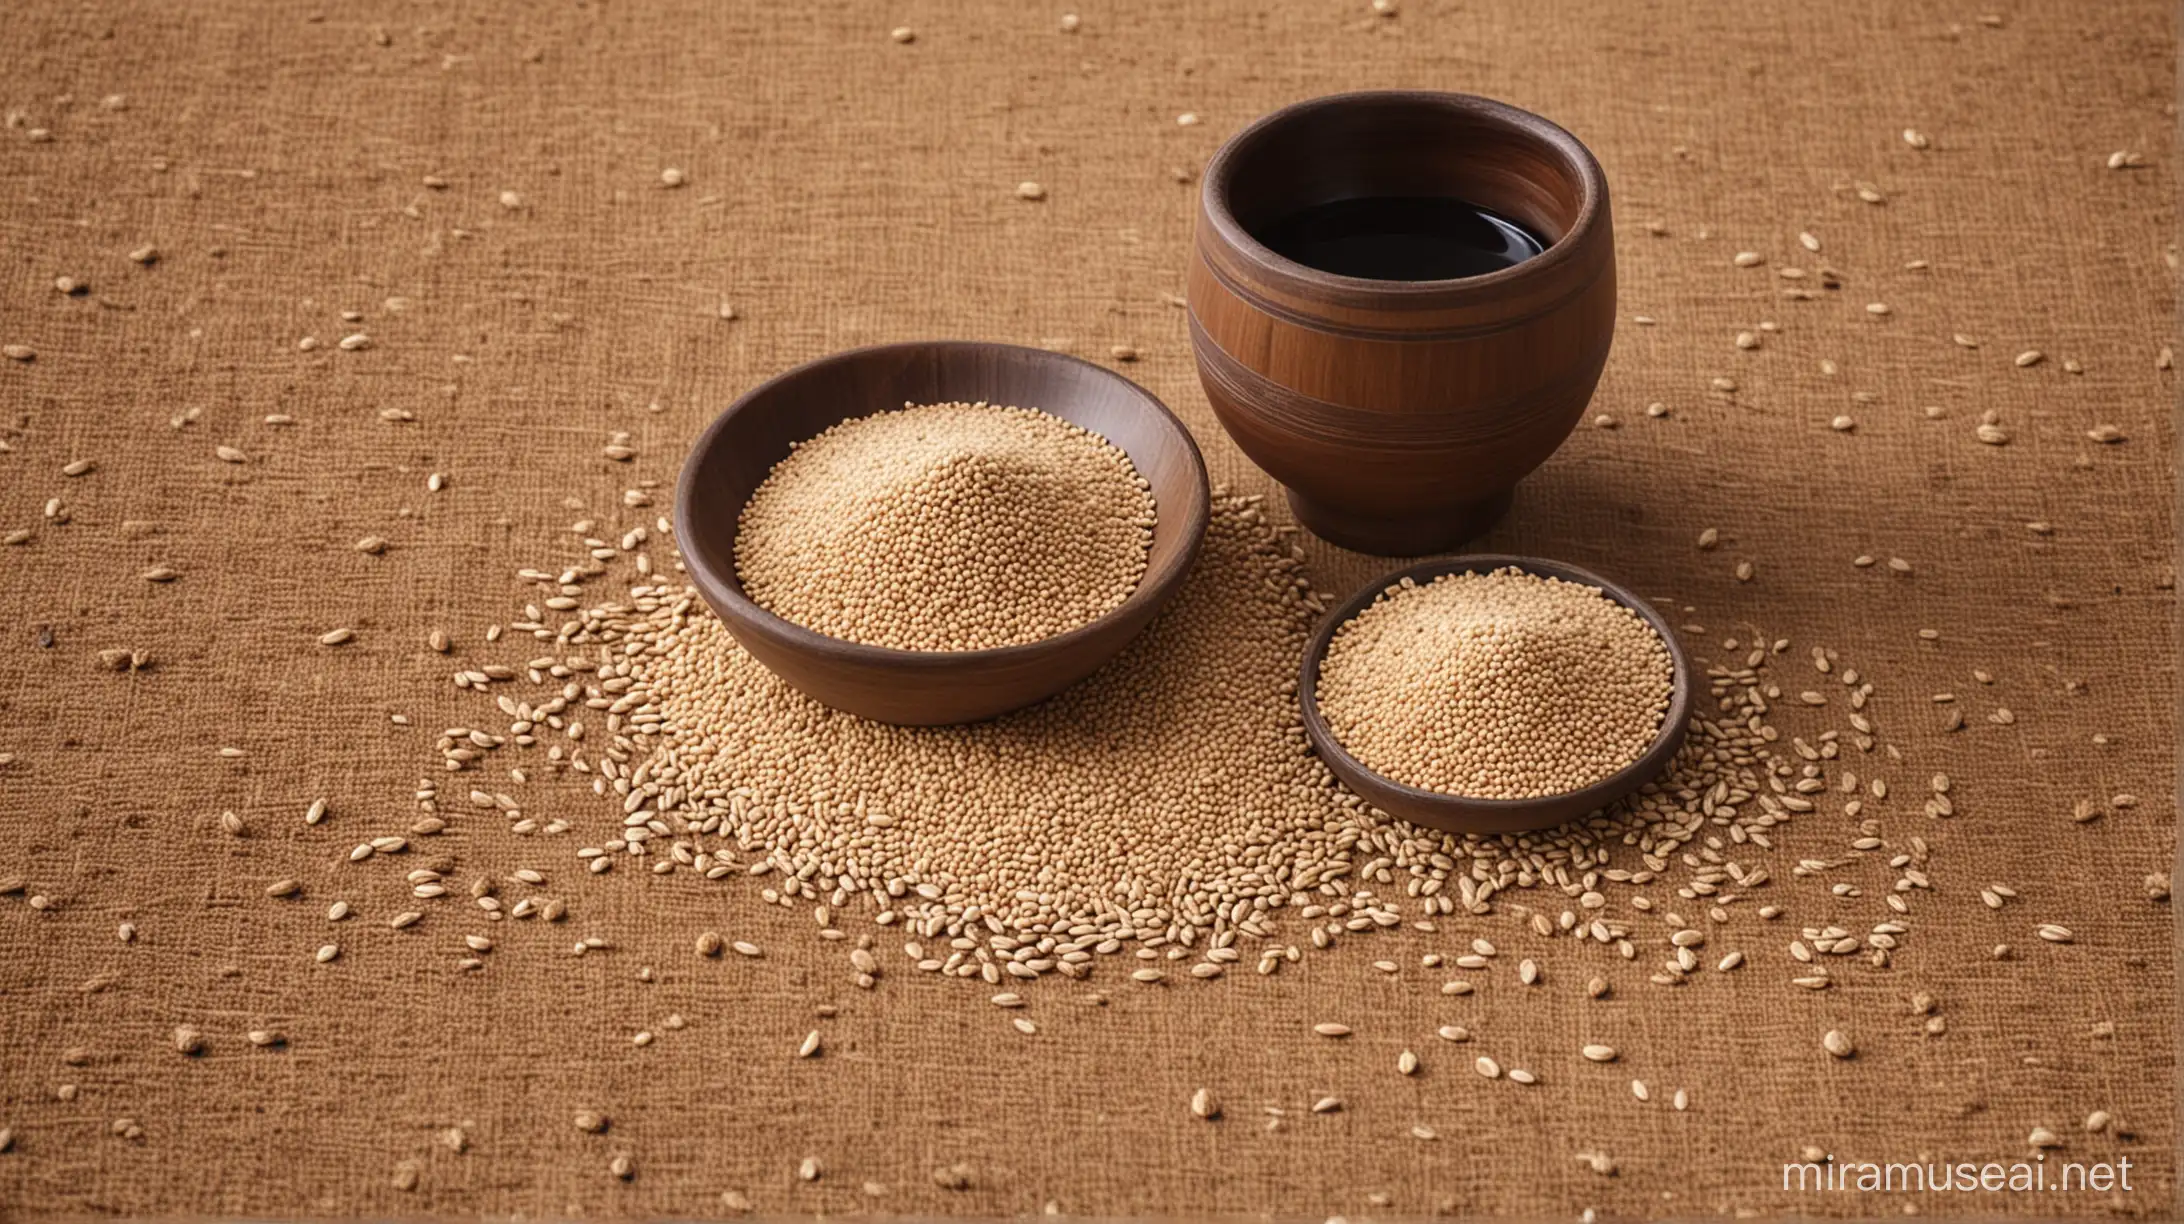 Grain and drink offerings to the LORD